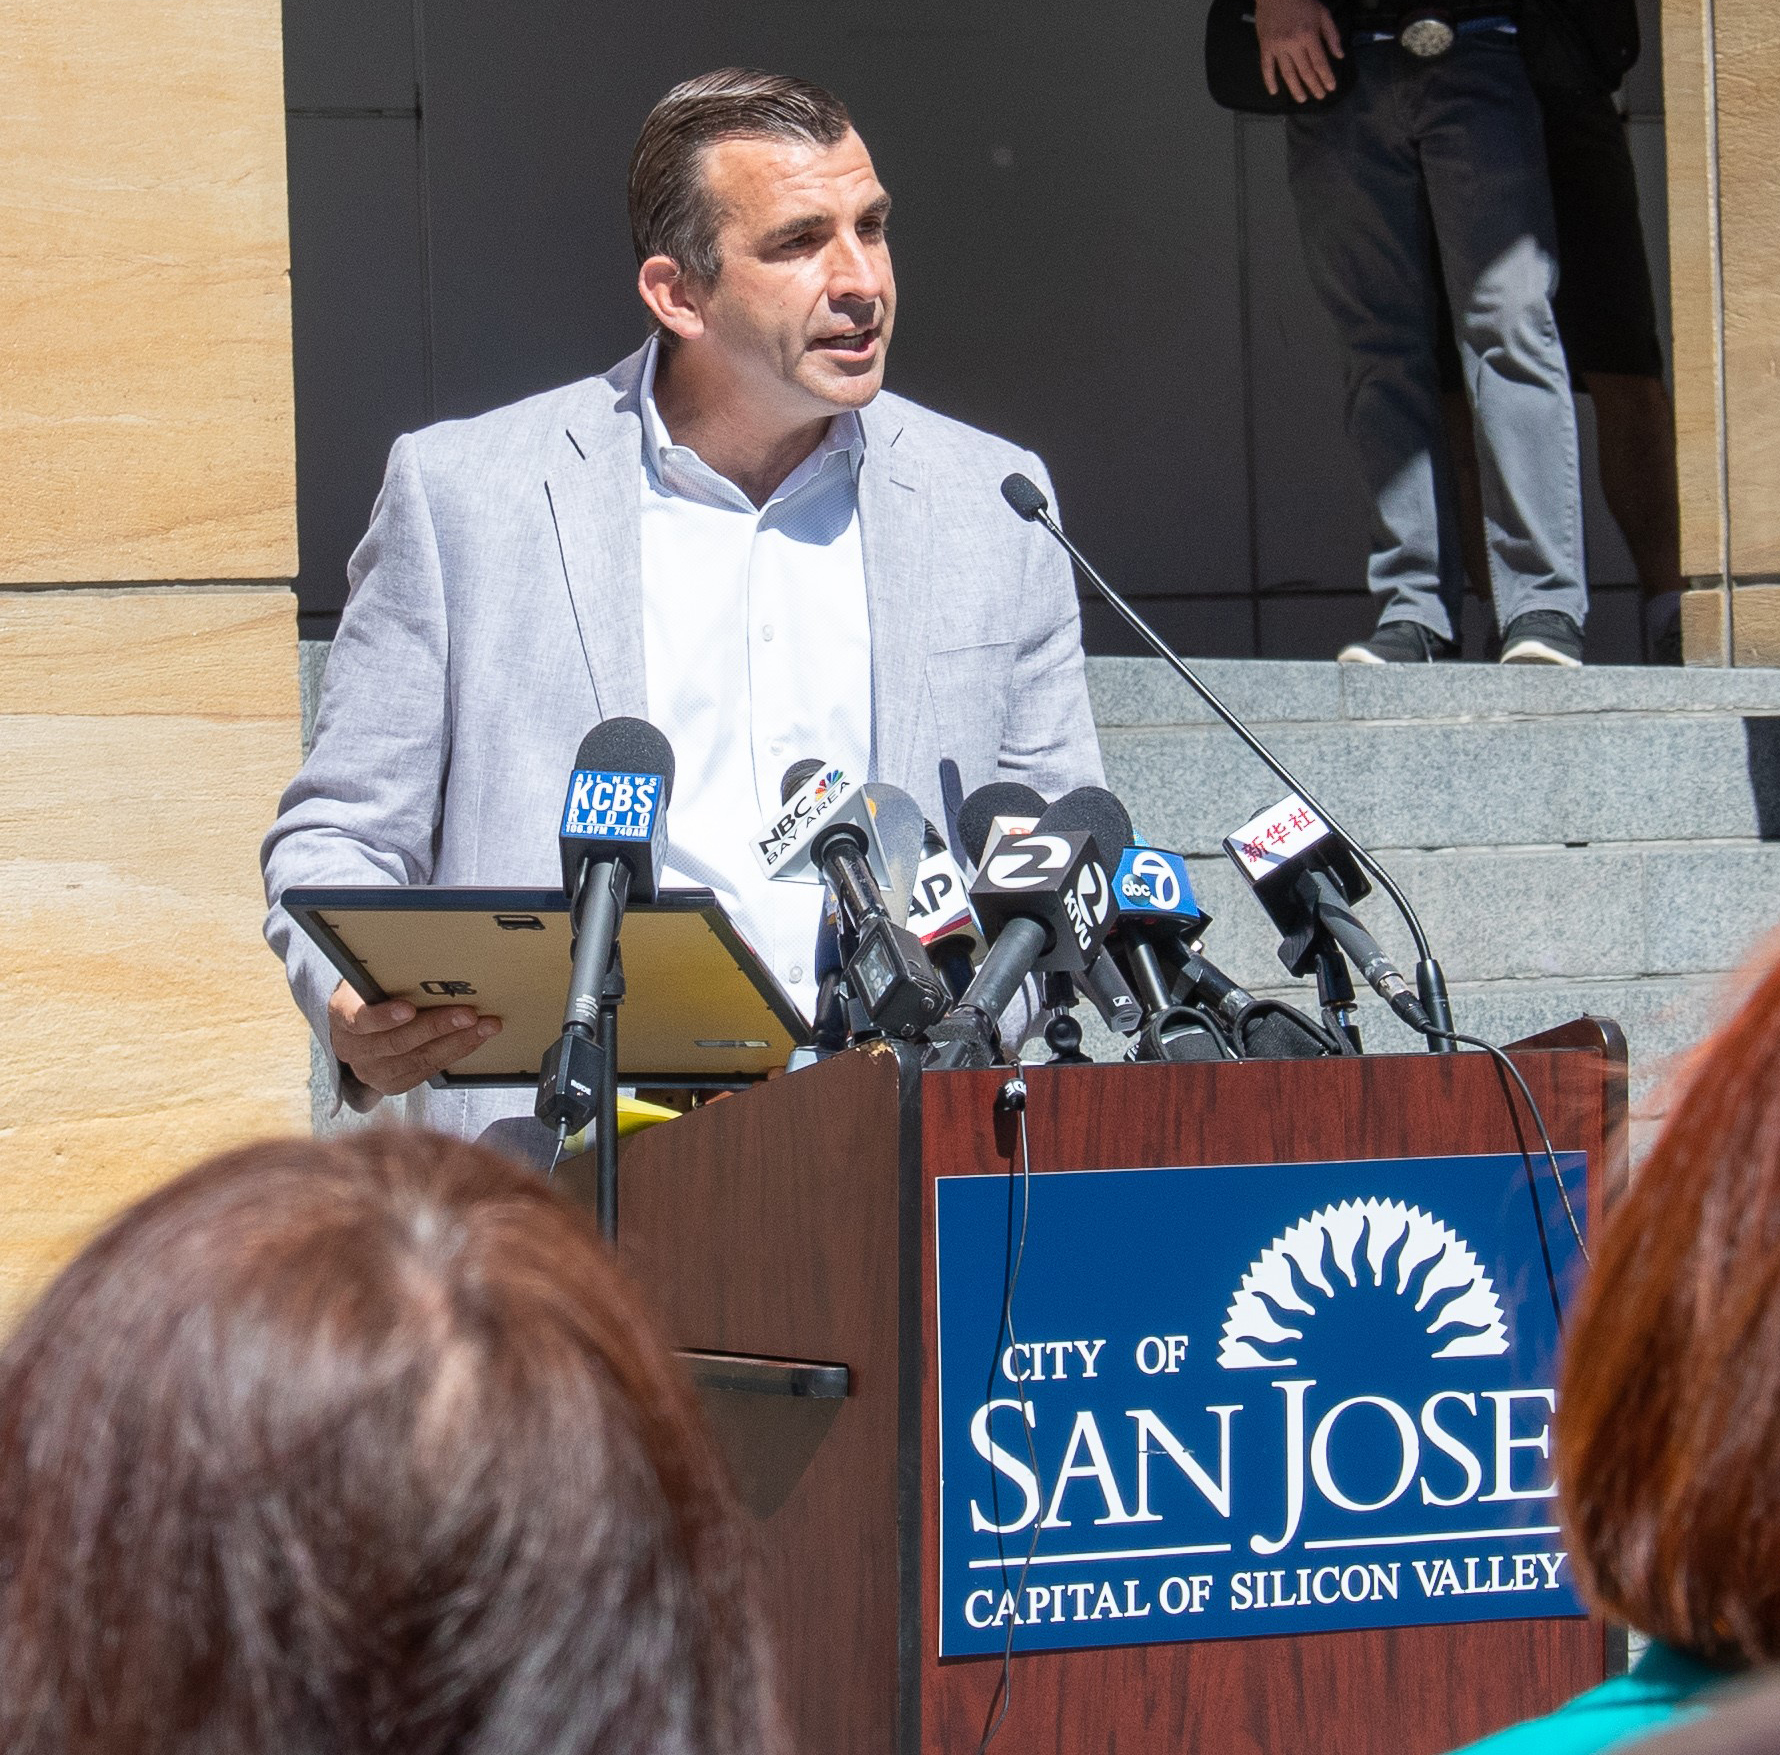 A man in a light gray jacket speaks at a podium surrounded by microphones. The podium has a sign that reads &quot;City of San Jose, Capital of Silicon Valley.&quot;